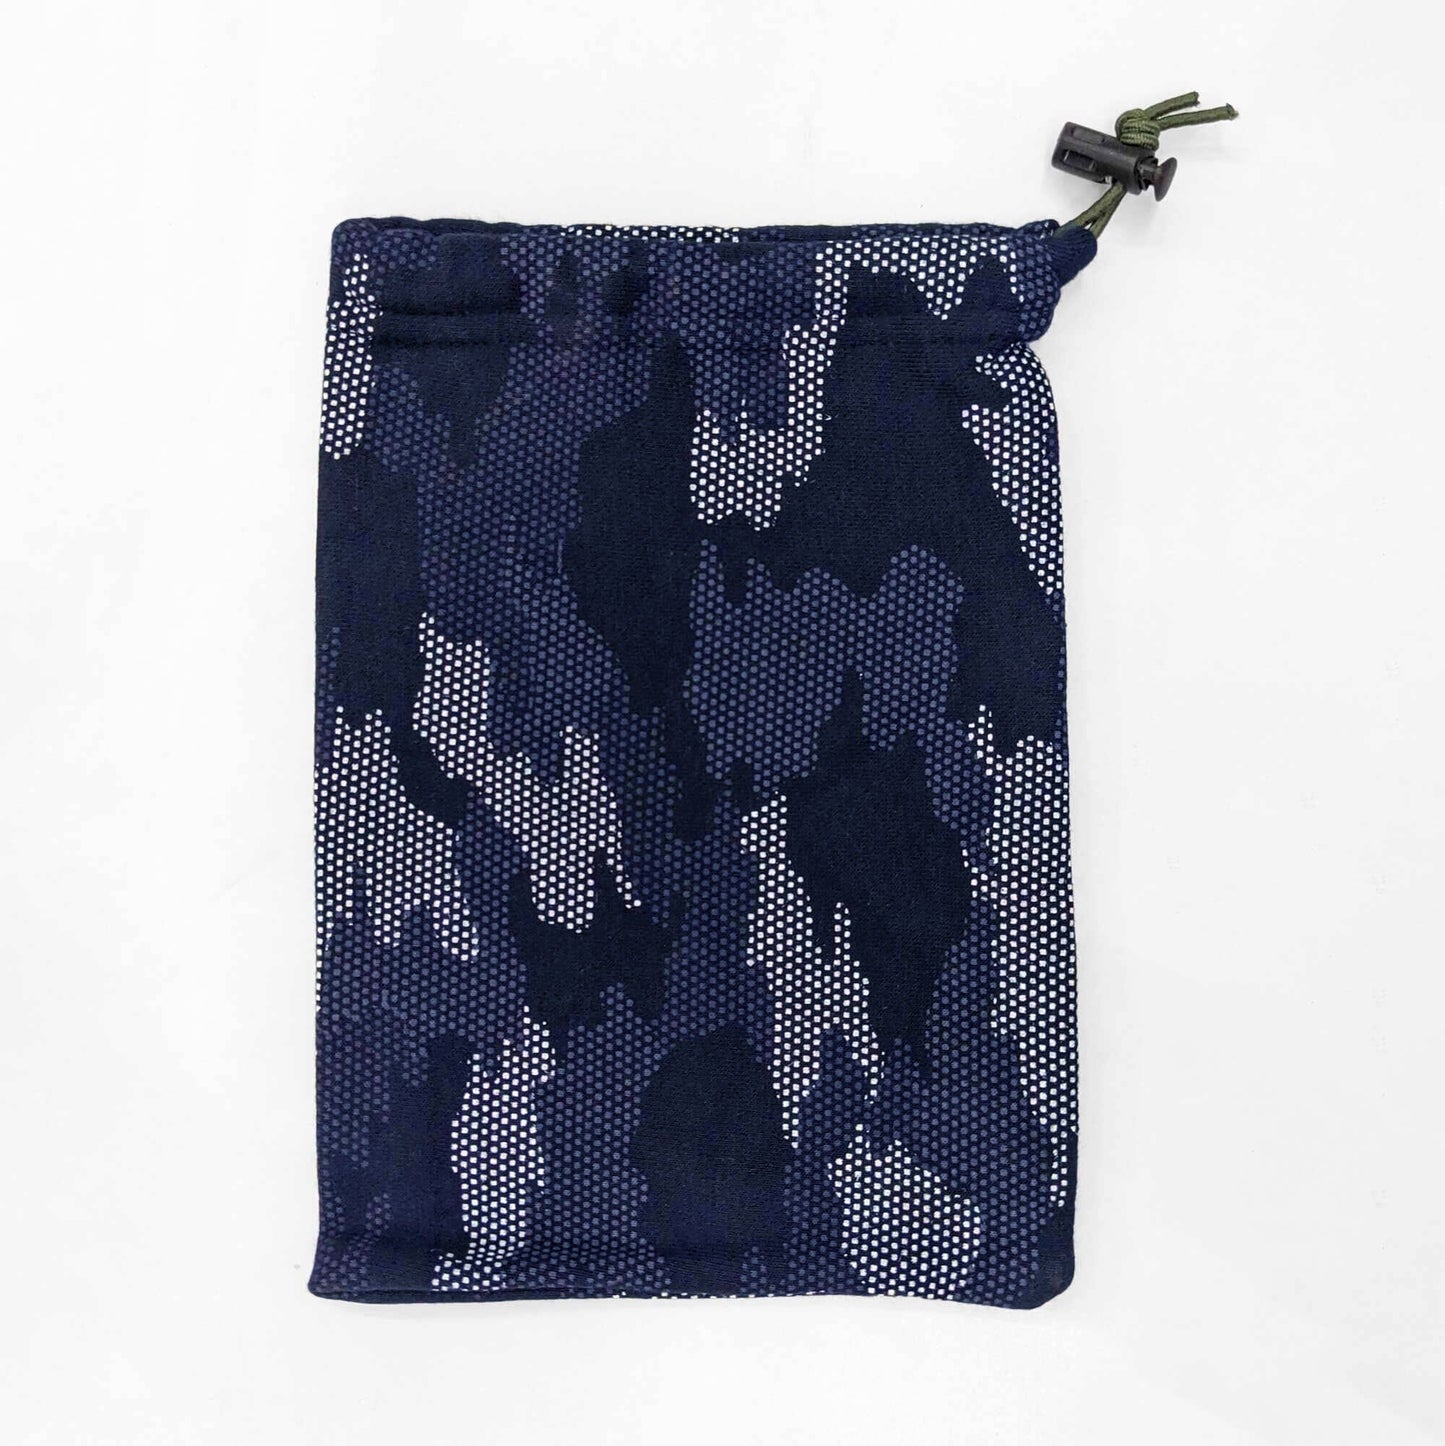 Polo Republica Enschede Elasticated Strips Pouch Stationary & General Accessories Polo Republica Camo Navy S (7.50 X 5.25) 